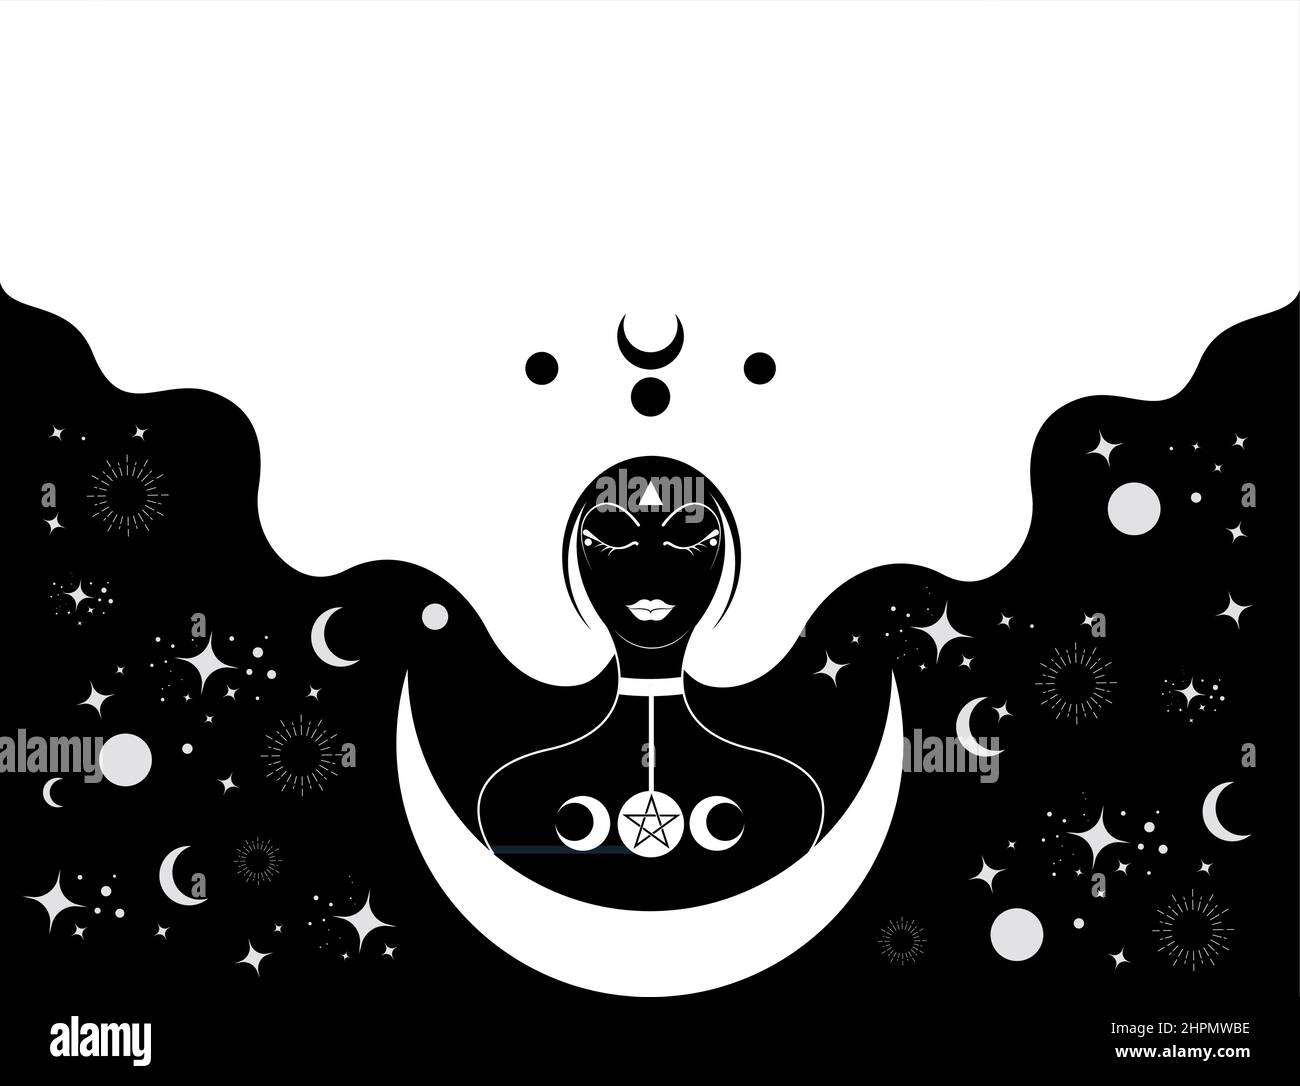 Priestess with lonh hair, template. Crescent moon, sacred wiccan black woman goddess icon. Triple Moon Religious Wicca sign. Neopaganism symbols Stock Vector